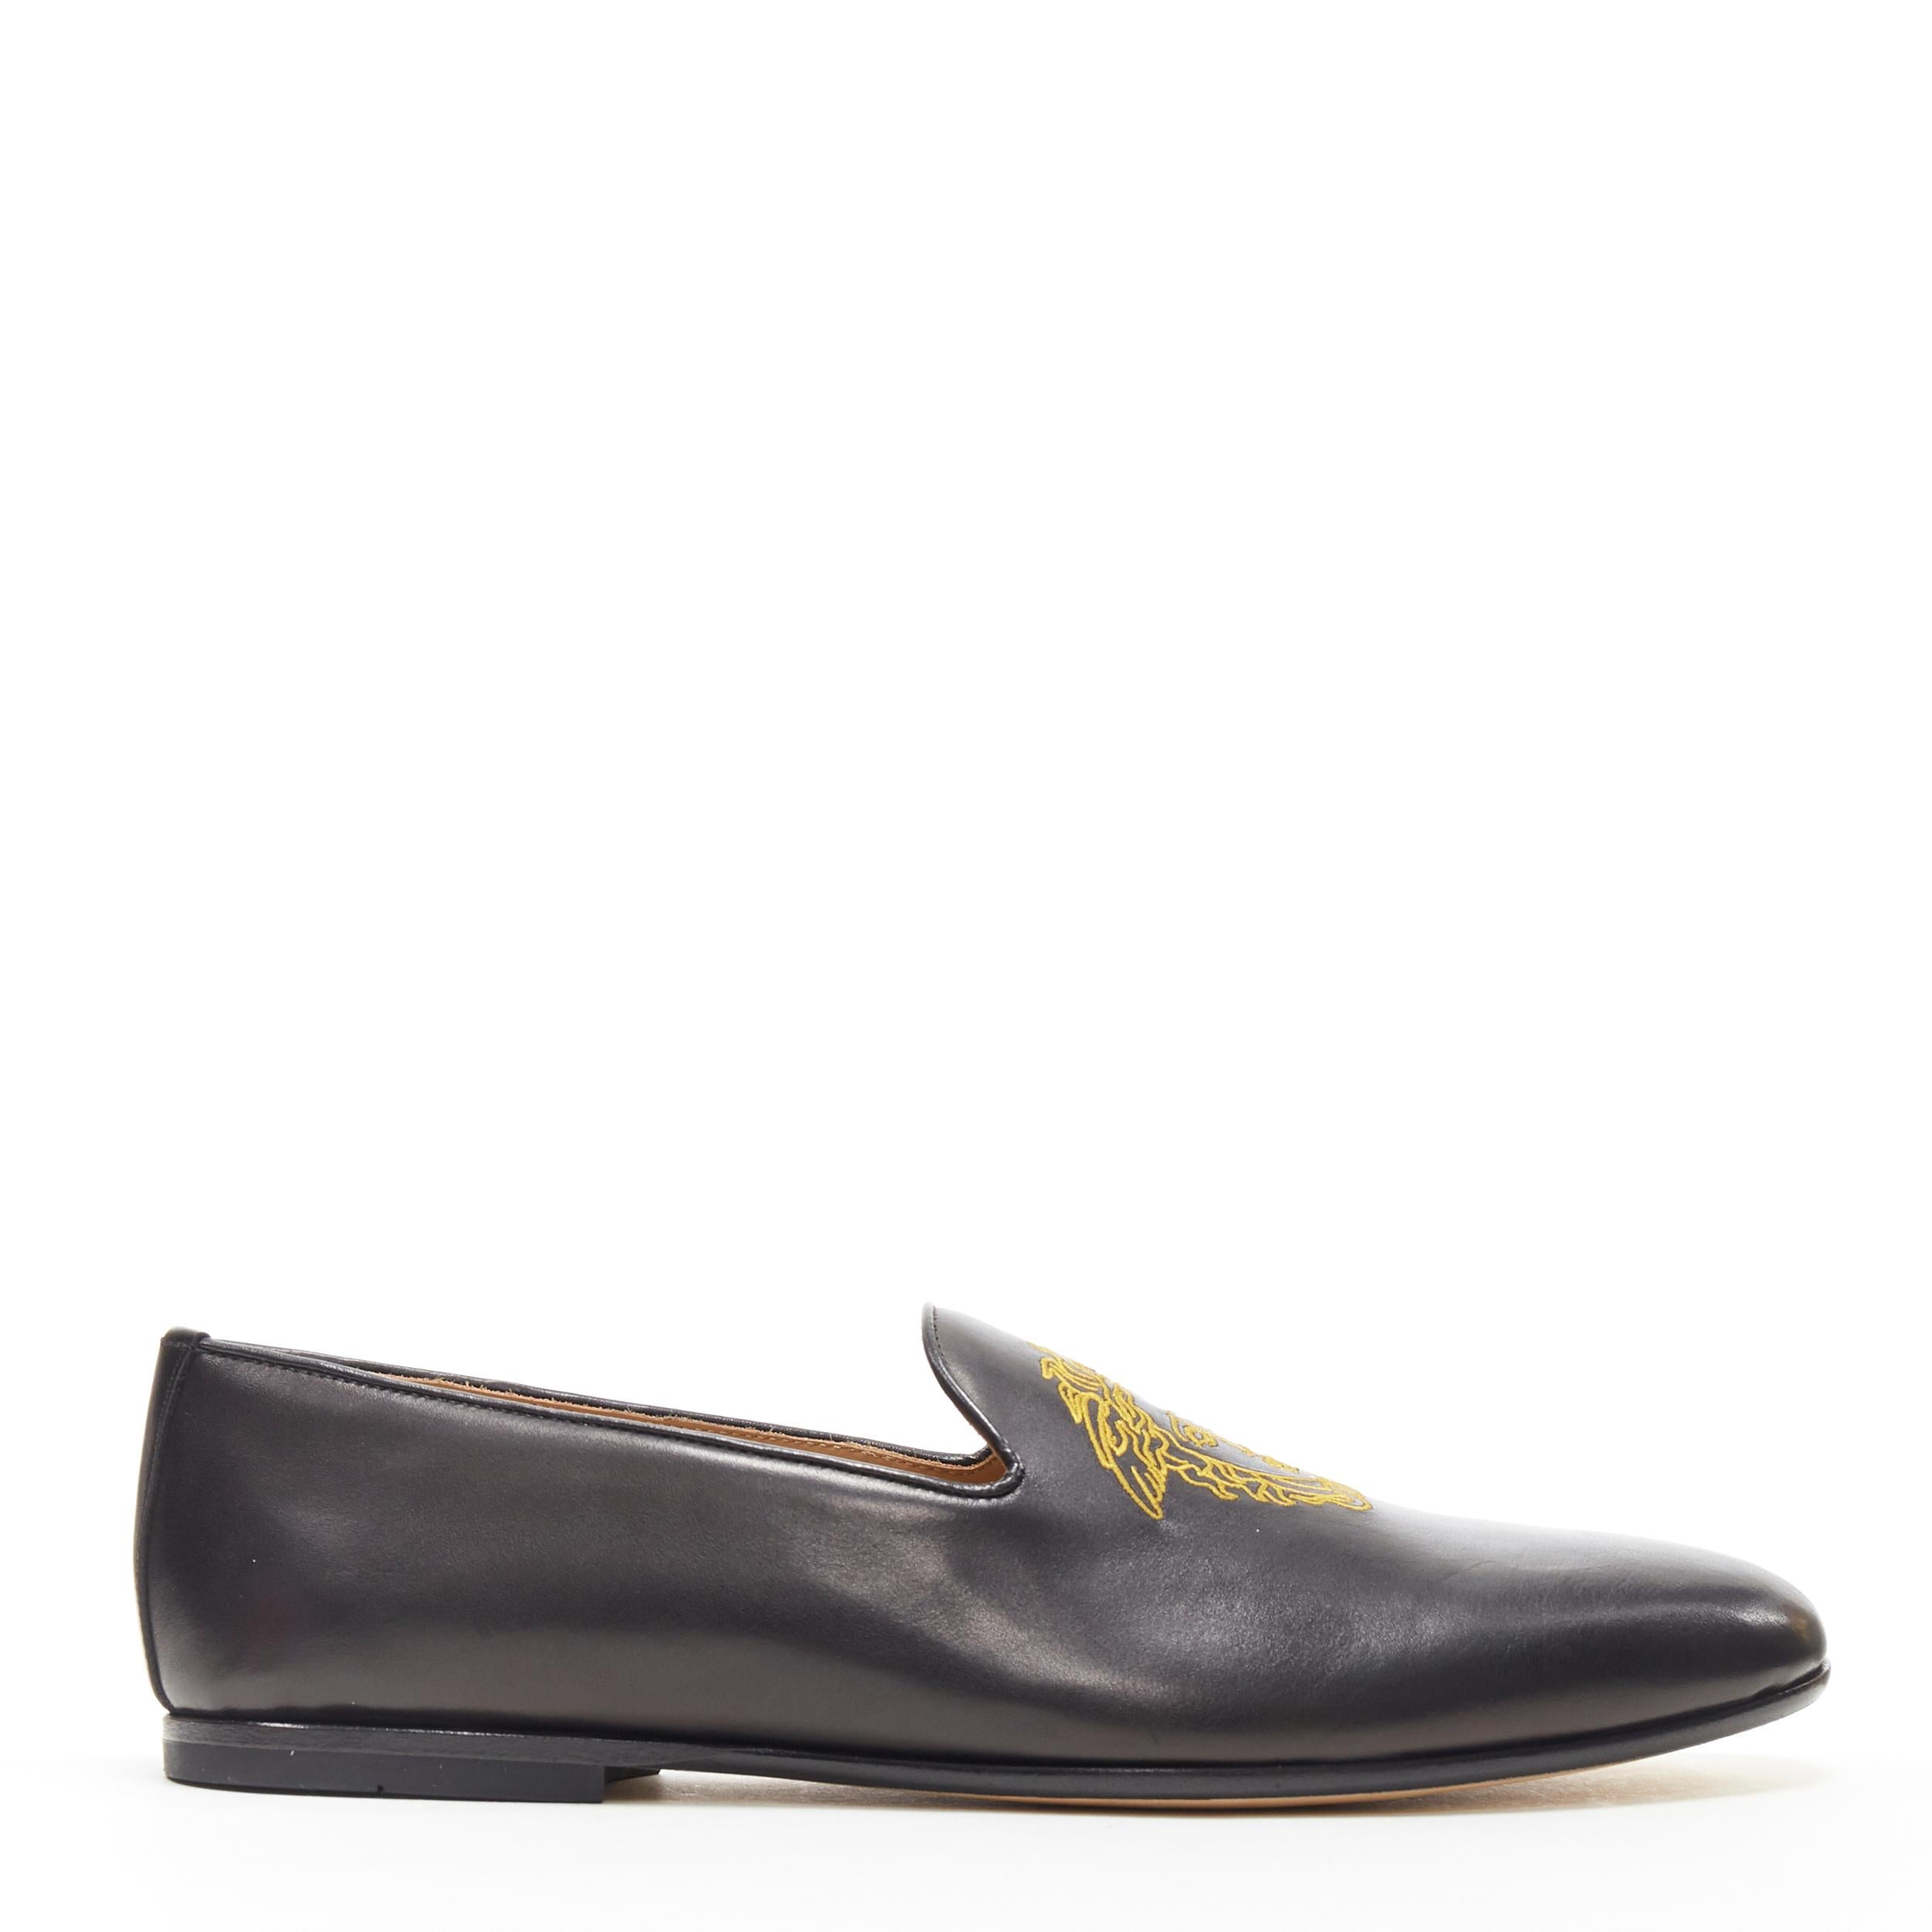 new VERSACE black leather gold Medusa embroidery Le Smoking slipper loafer EU44
Brand: Versace
Designer: Donatella Versace
Collection: 2019
Model Name / Style: Medusa loafer
Material: Leather
Color: Black
Pattern: Solid
Extra Detail: Calf leather